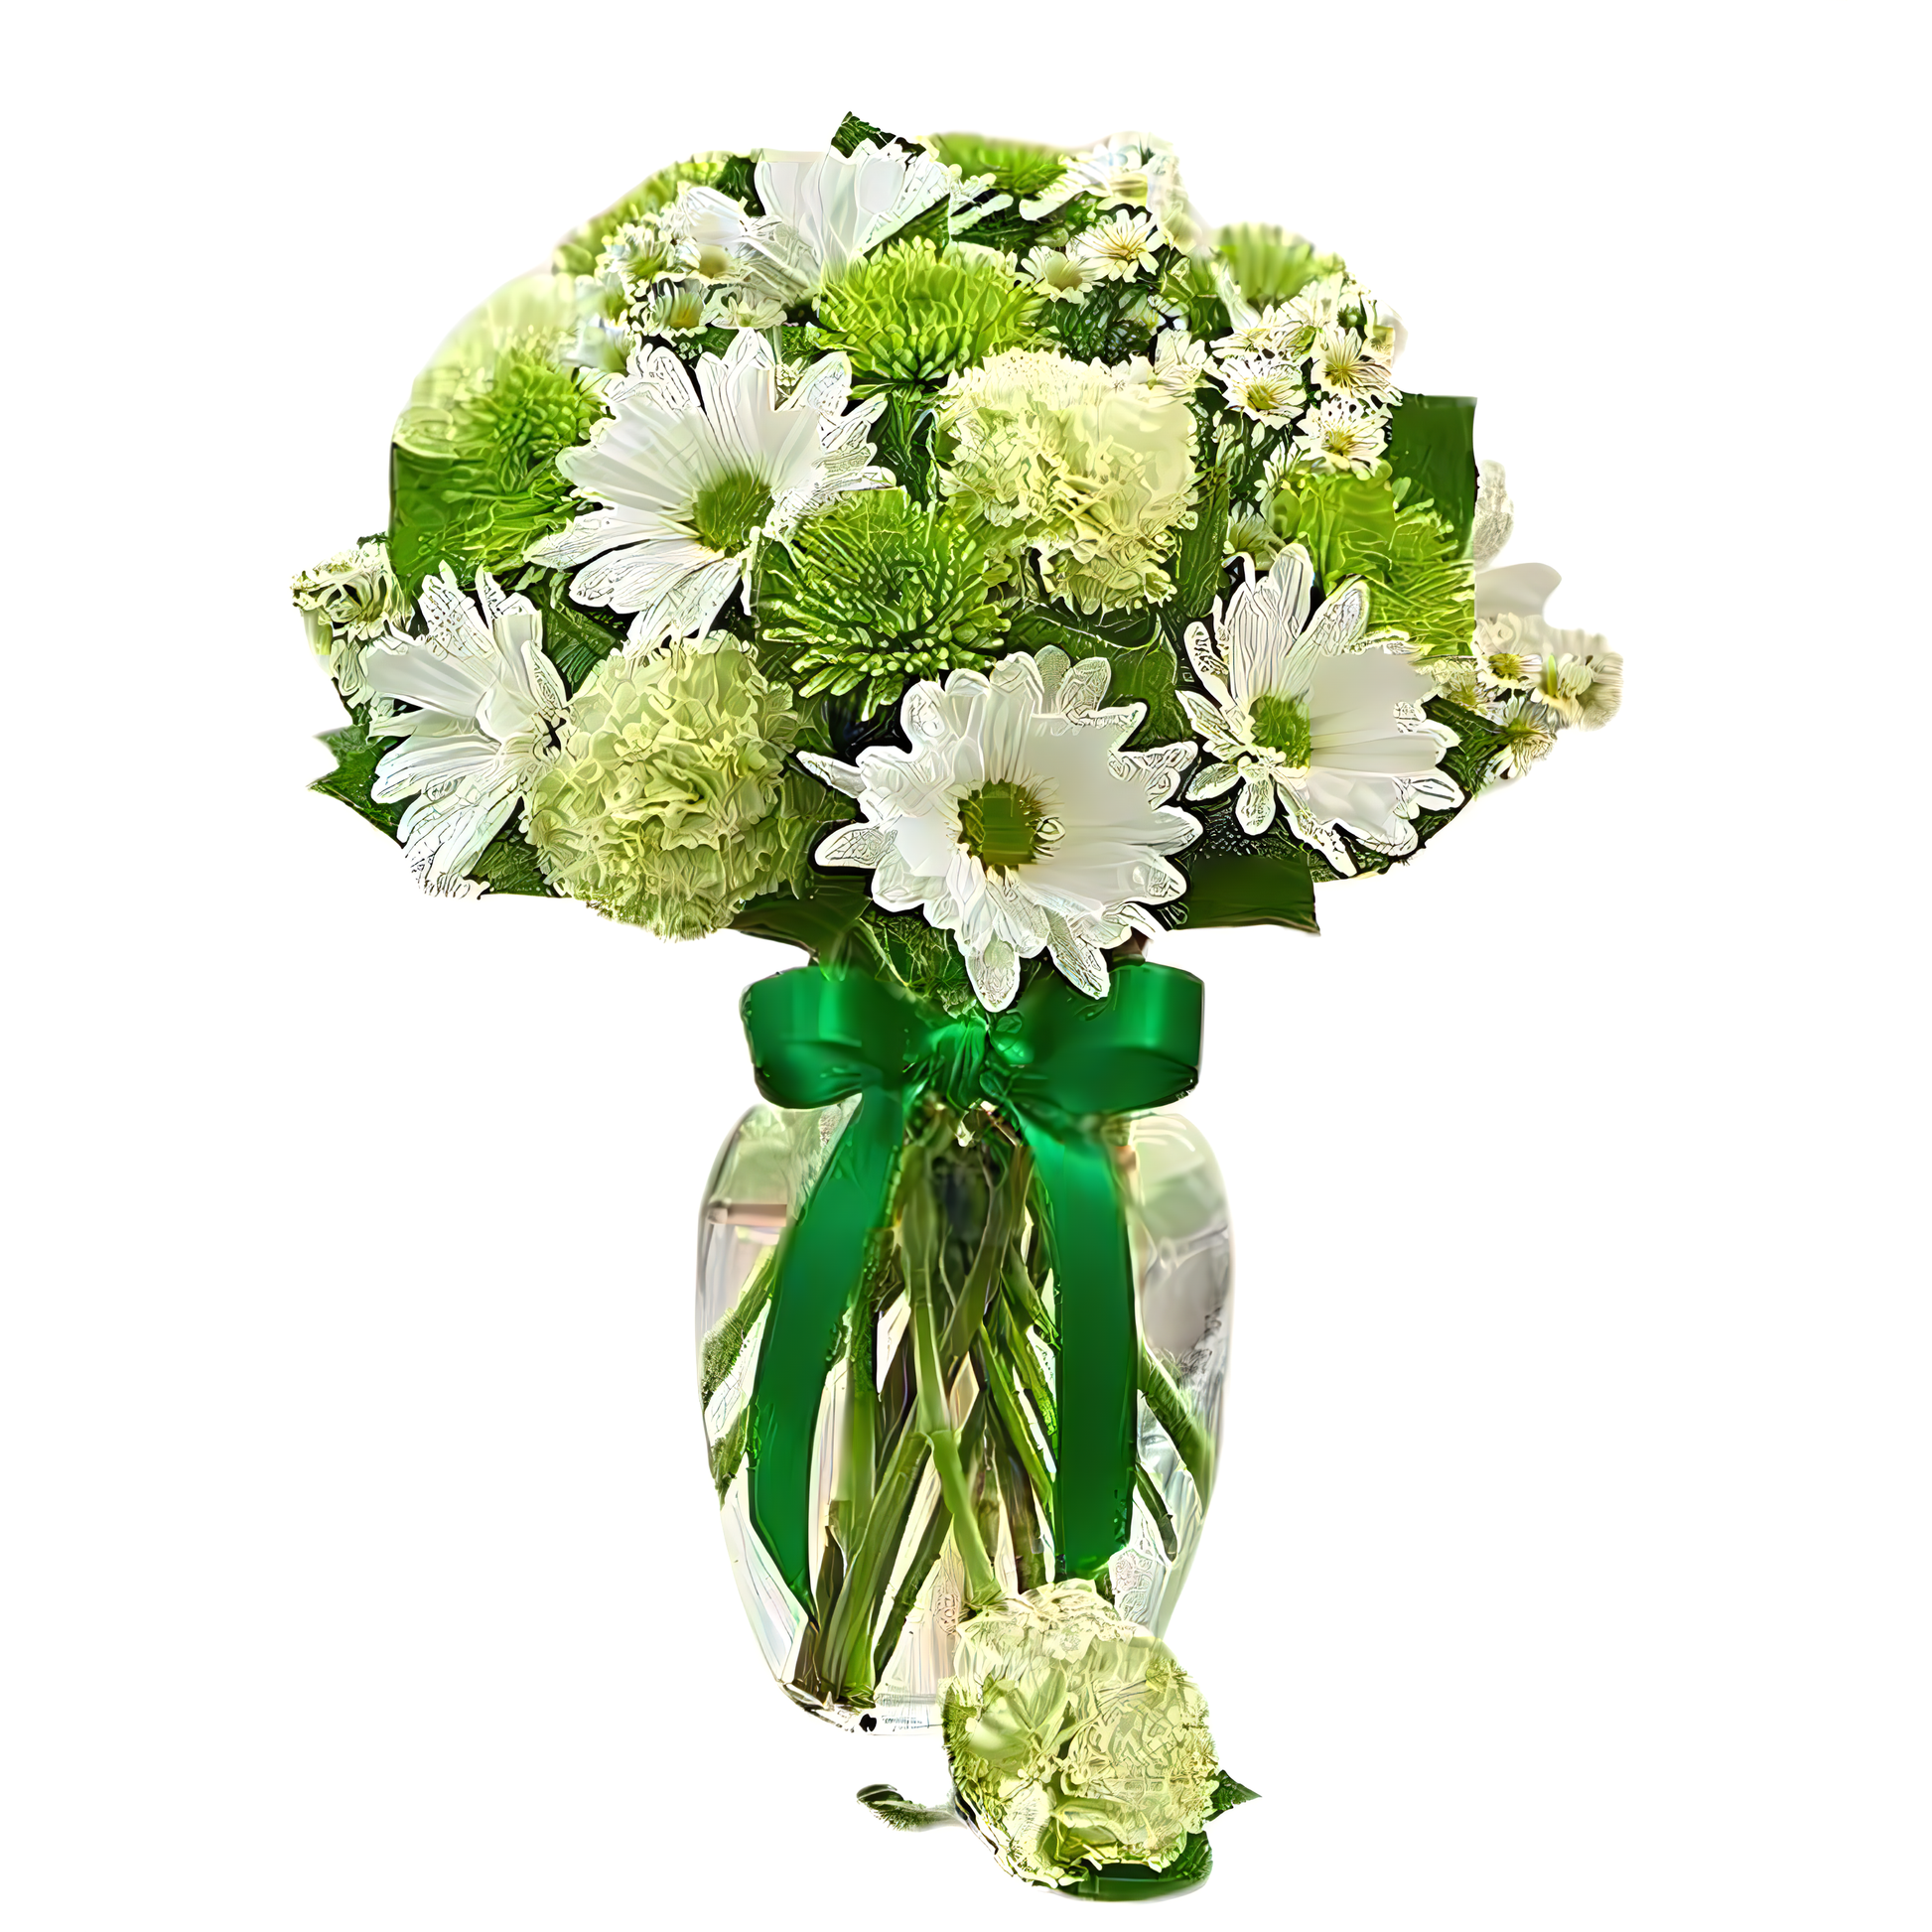 It's Your Lucky Day Bouquet with Boutonniere - Seasonal > Saint Patrick's Day - 3/17